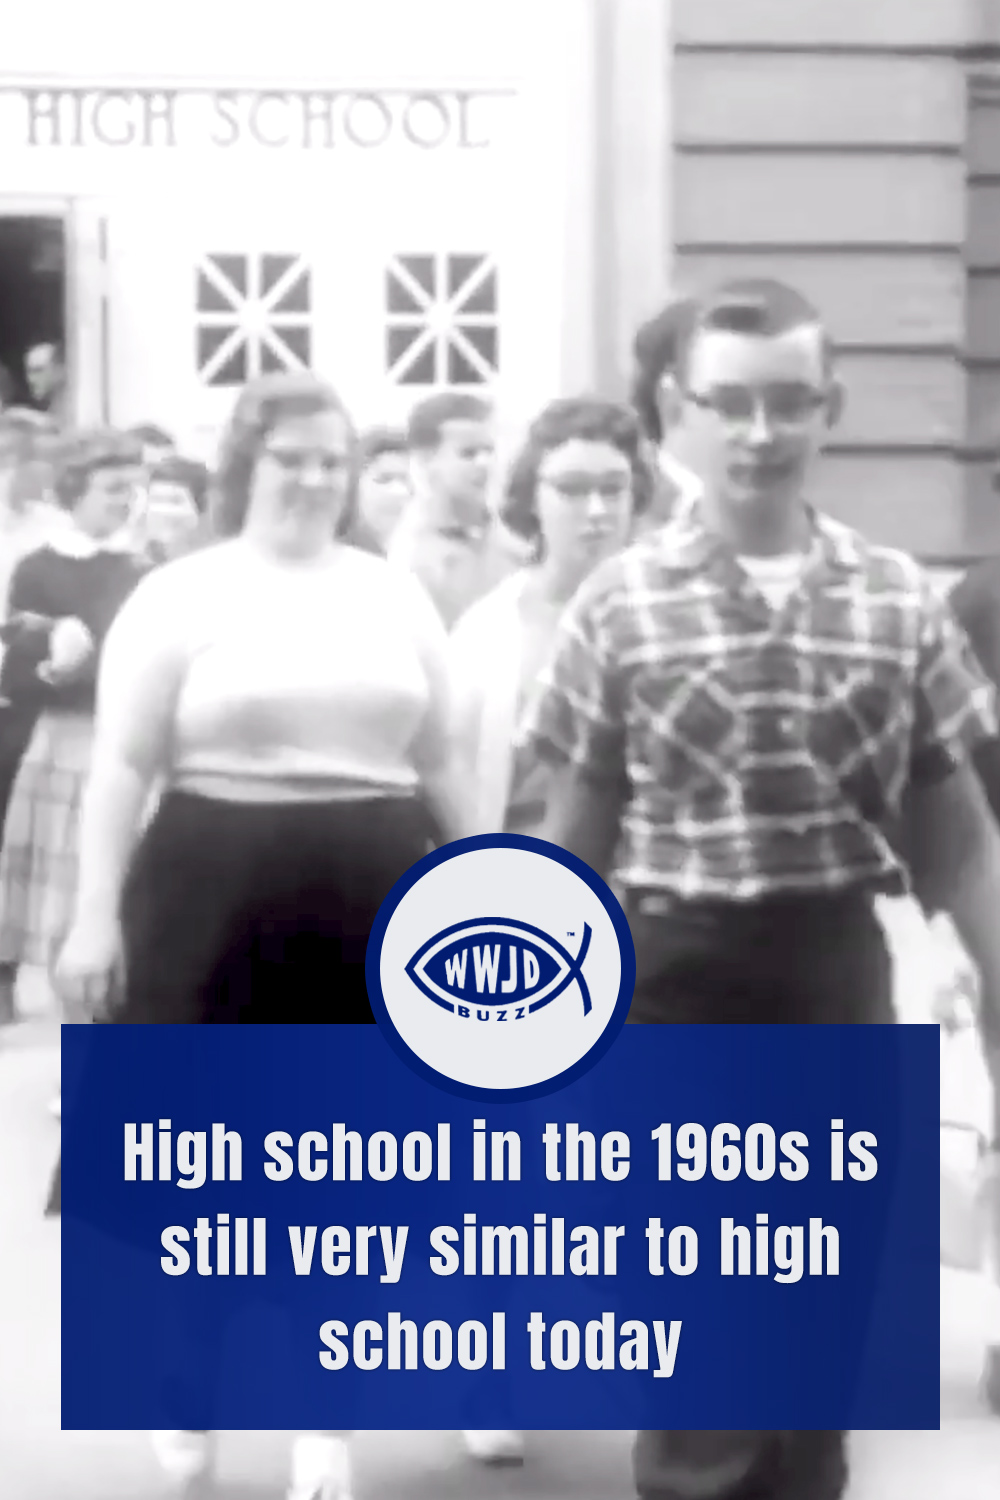 High school in the 1960s is still very similar to high school today